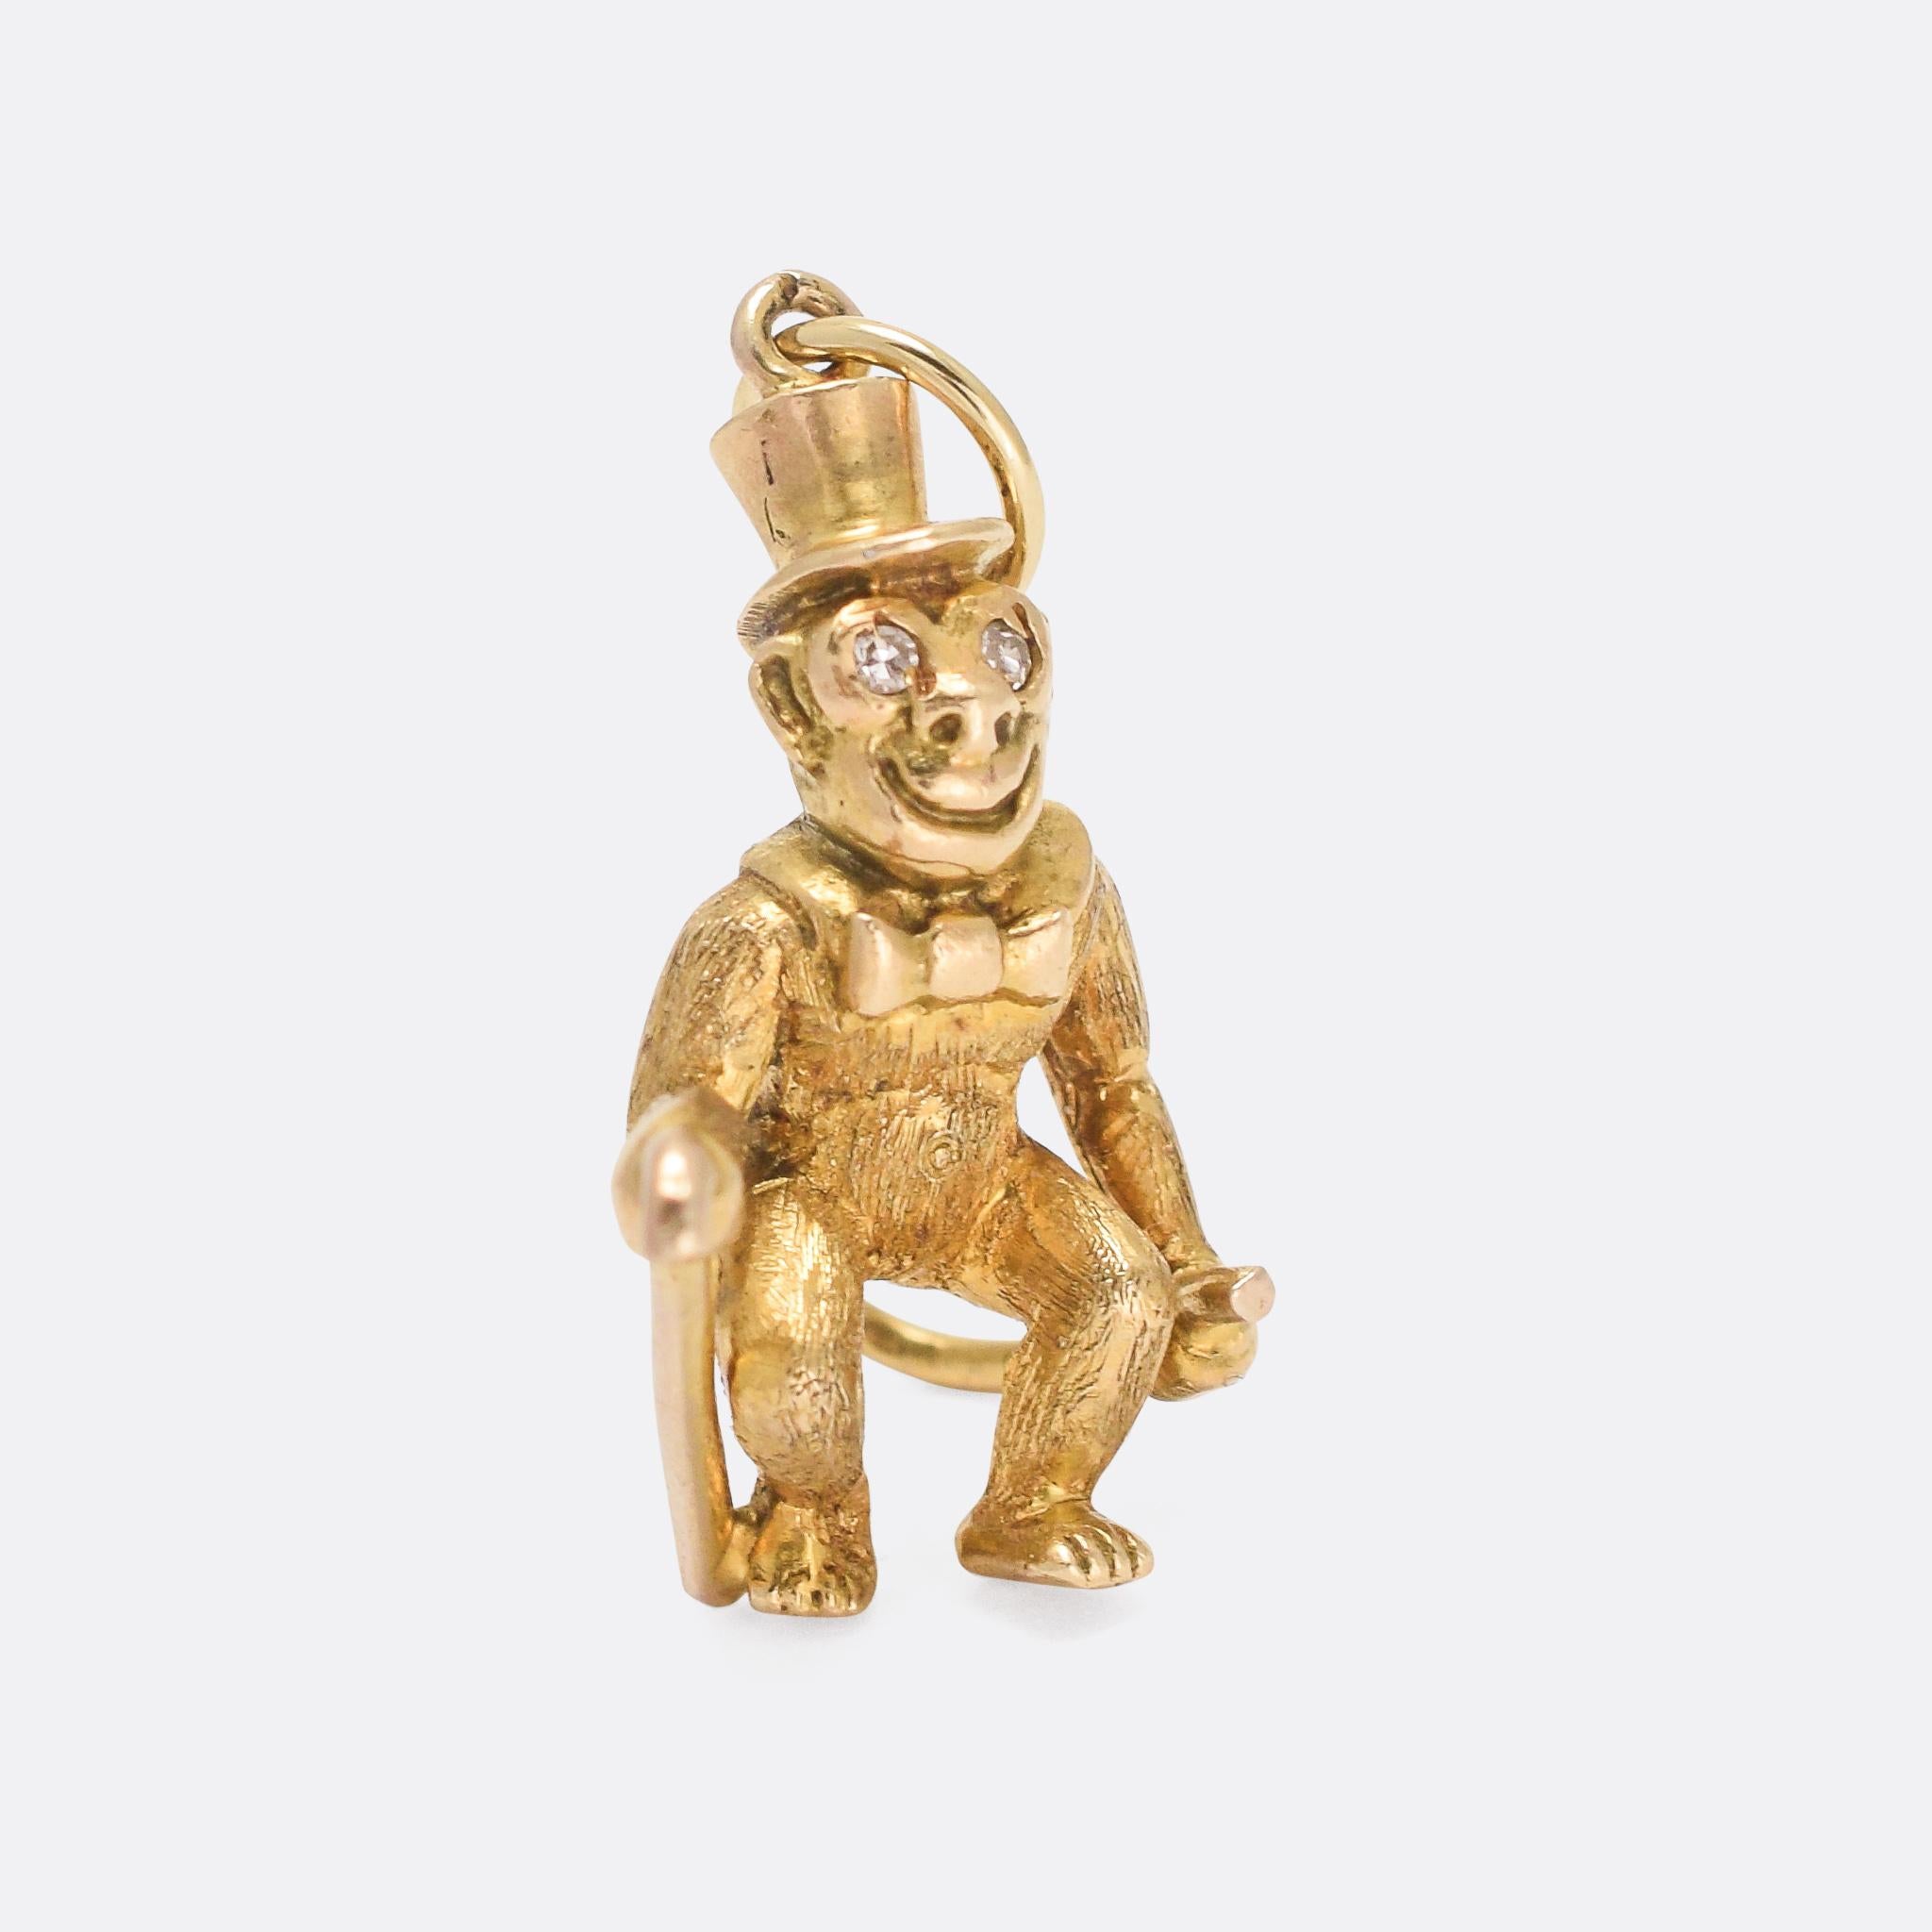 A particularly high quality vintage novelty pendant crafted as a monkey in Victorian finery: wearing a top hat and bow tie, no less. It's modelled in solid 9k gold, set with diamond eyes, and heavy at 5 grams. With clear London hallmarks for the